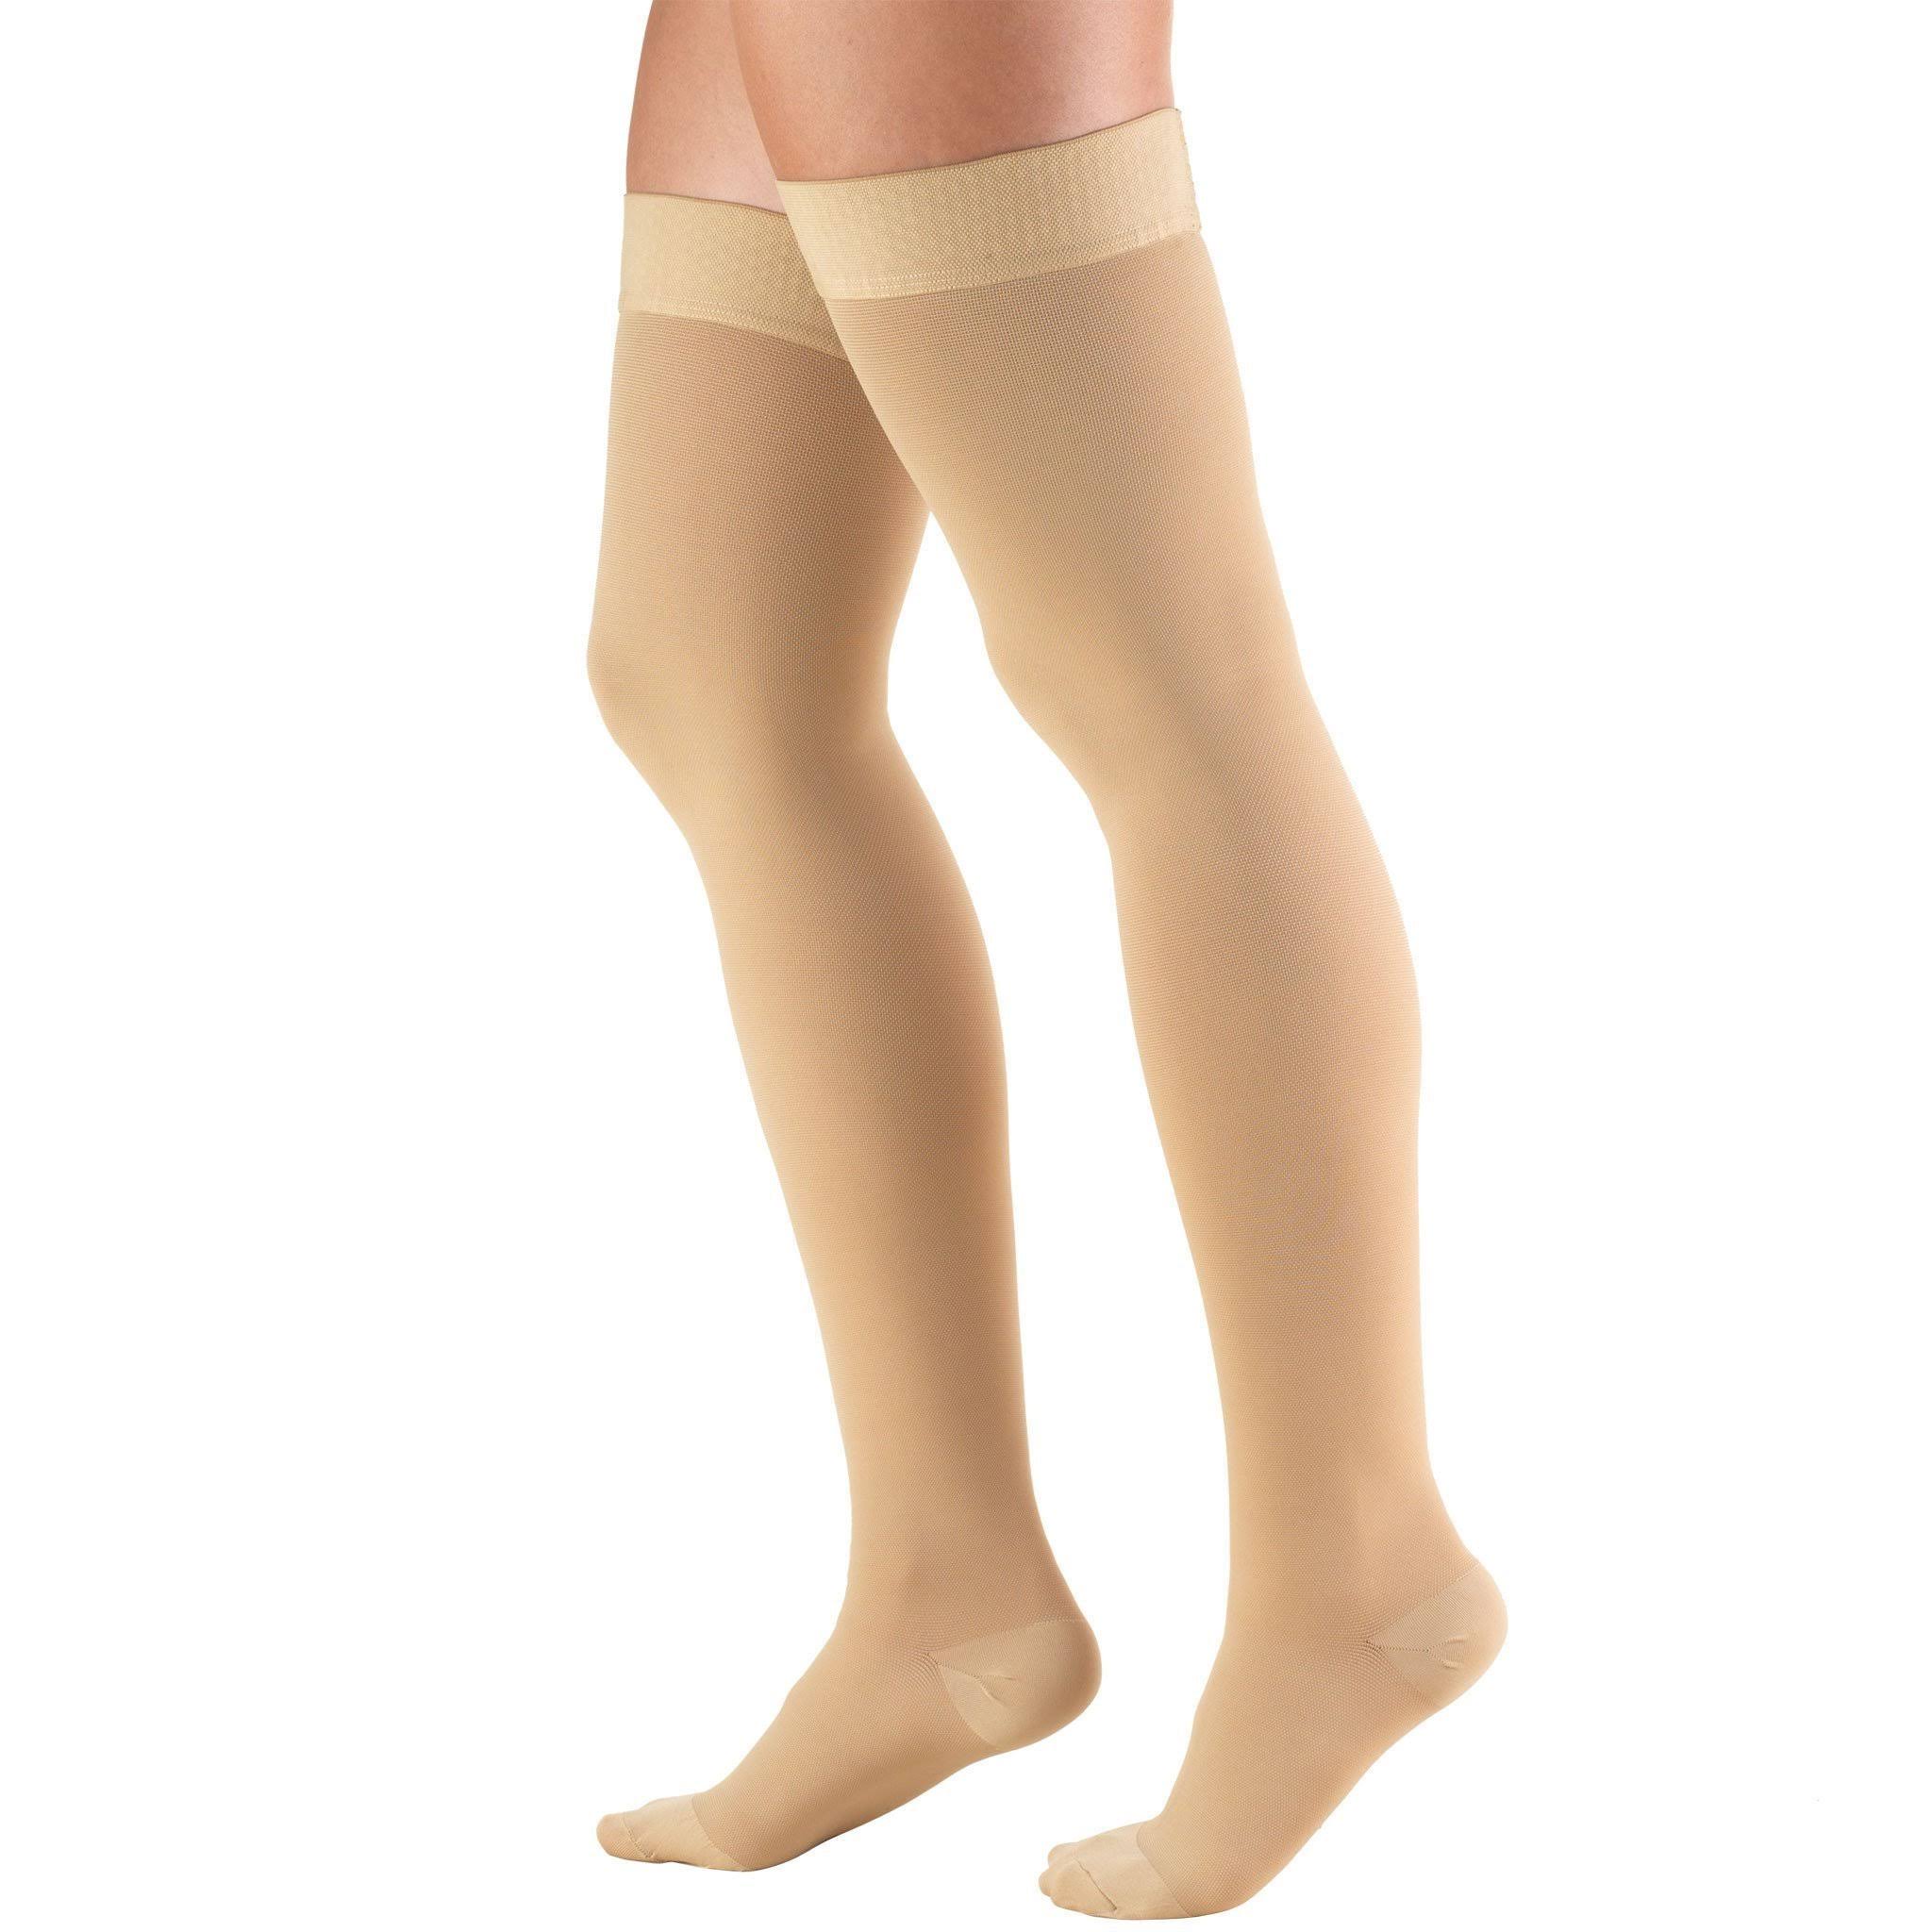 Truform Knee High Open Toe Compression Stockings - Beige, Small, 15-20mmHg